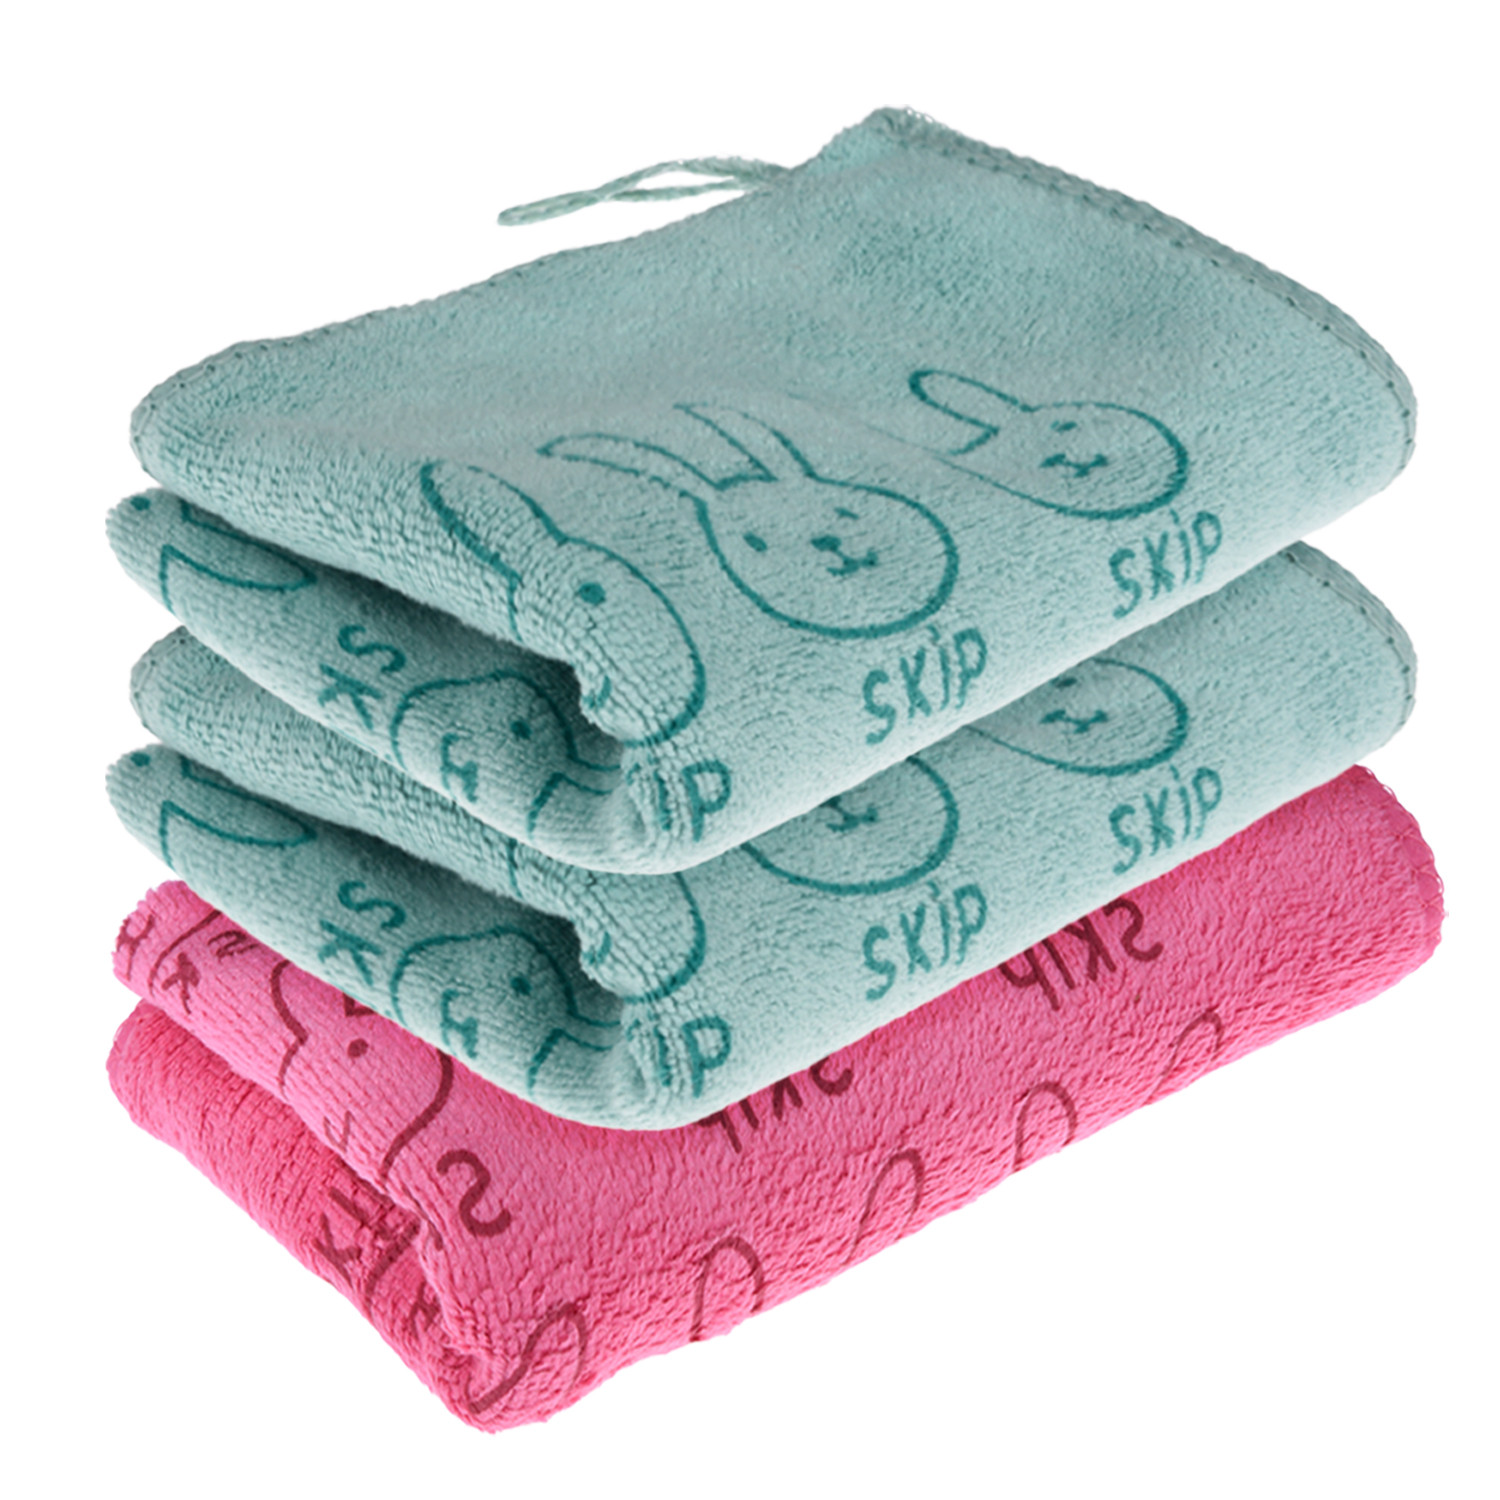 Kuber Industries Cleaning Towel | Reusable Cleaning Towel for Baby | Duster Towel for Home Cleaning | Skip Cleaning Cloth Towel with Hanging Loop | 30x40 | Pack of 3 | Multi